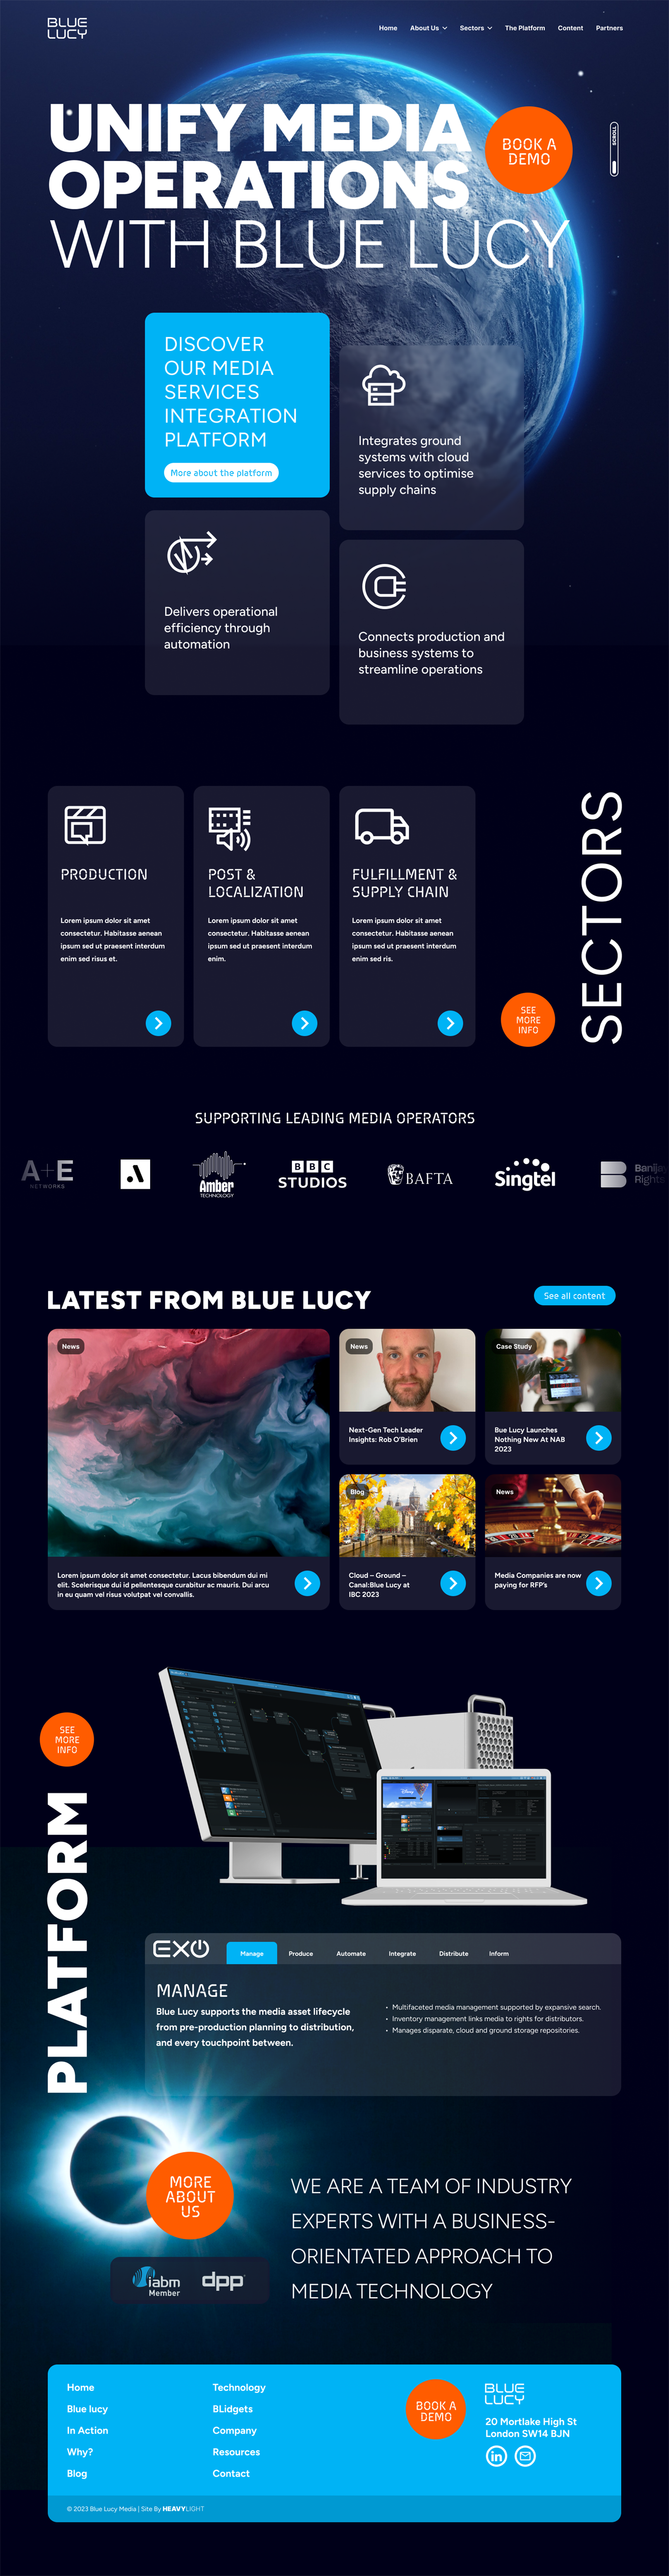 Blue Lucy website homepage